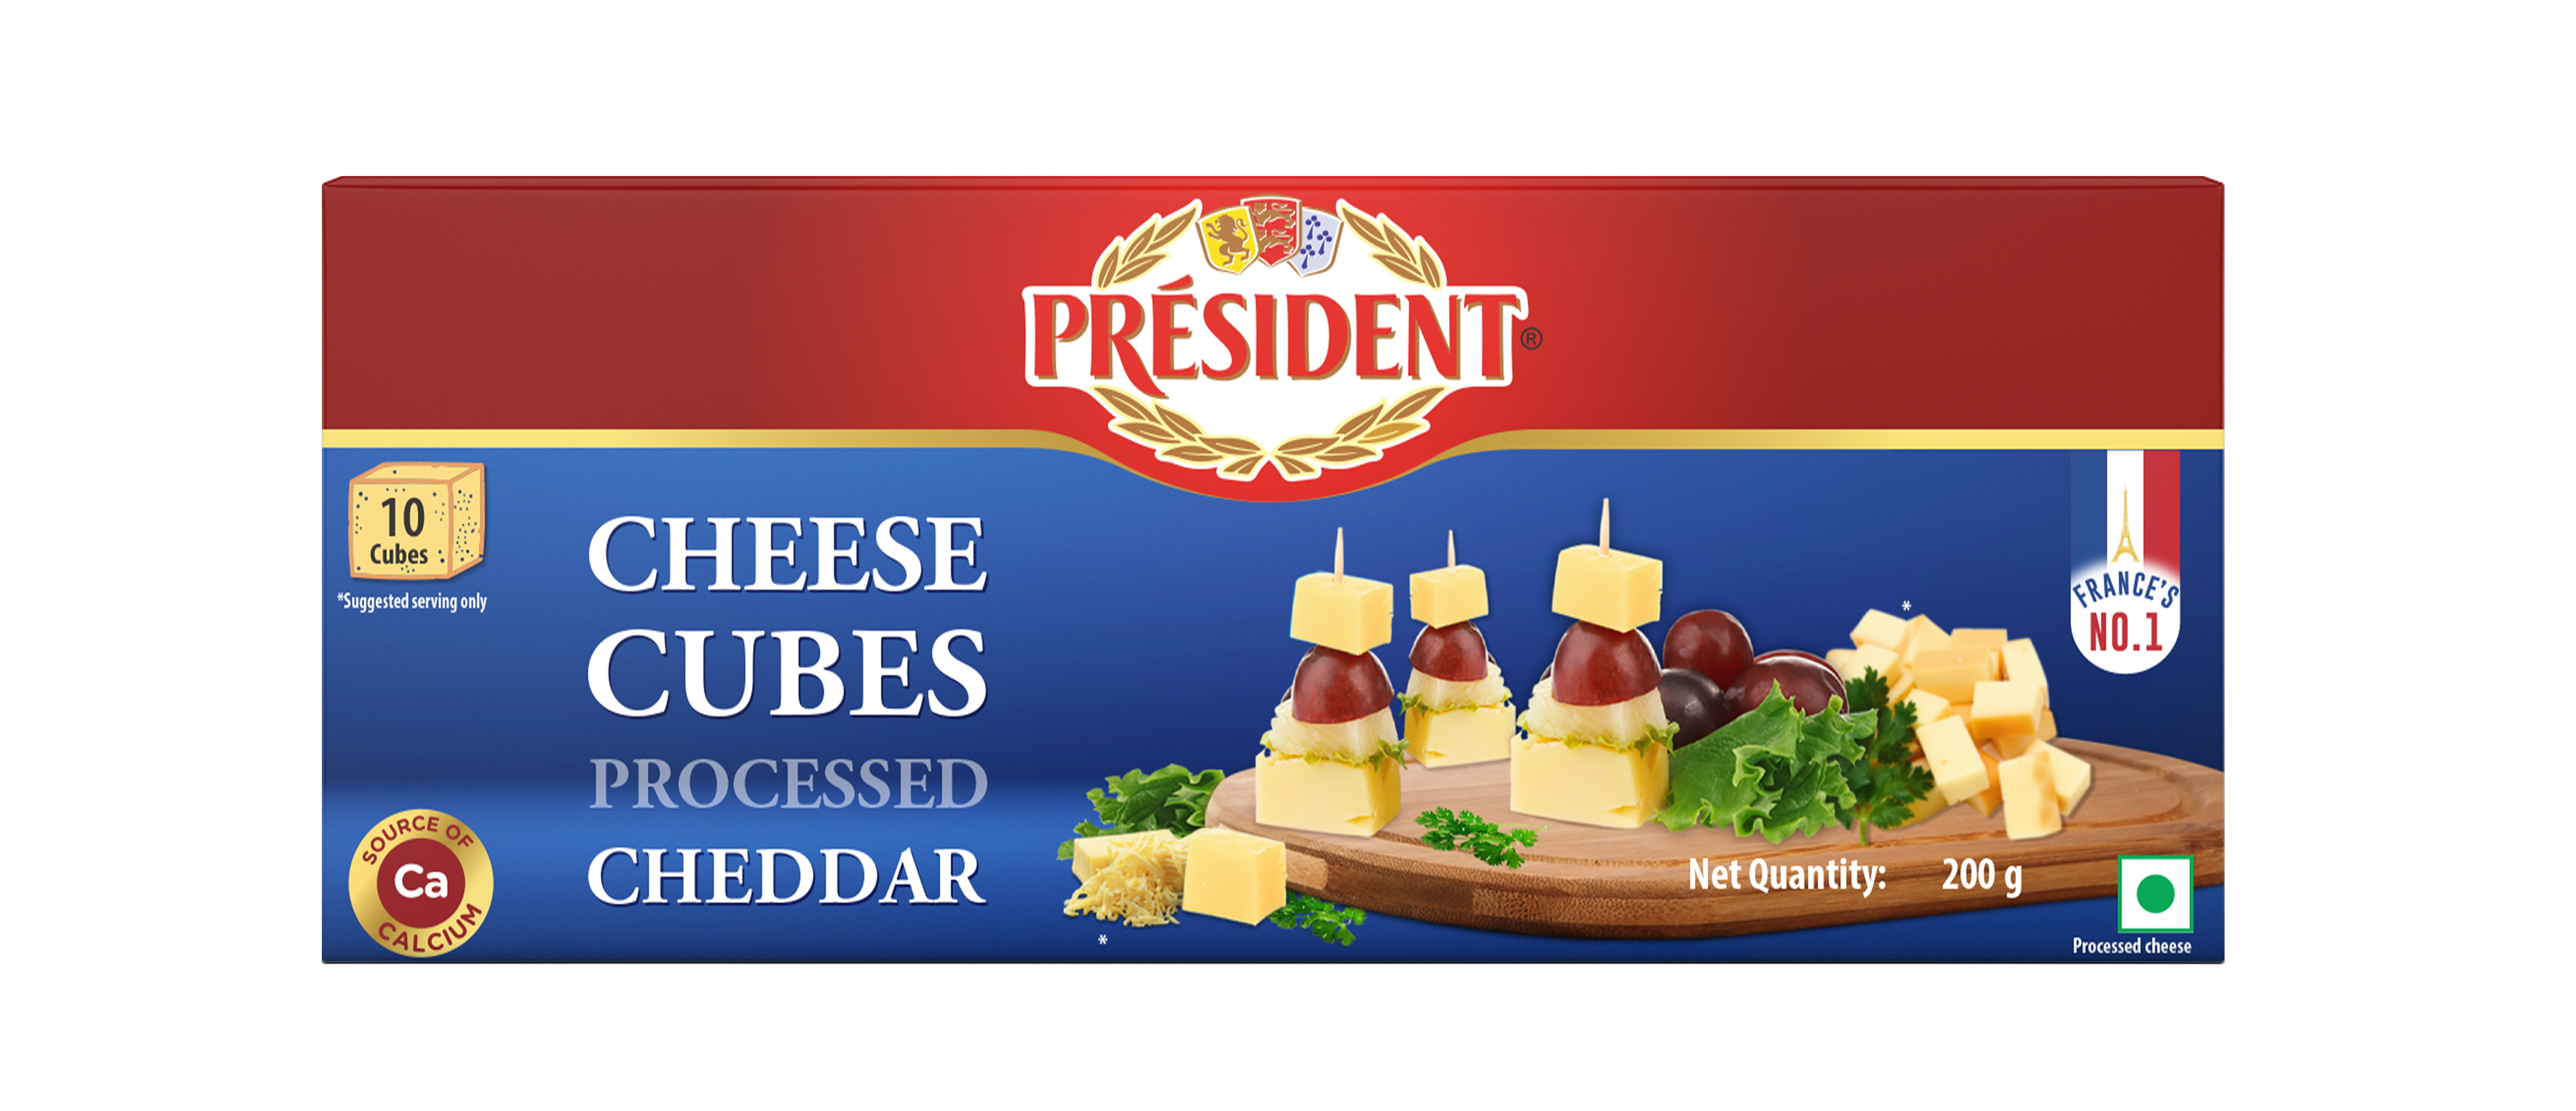 Président ® Cheese Cubes Processed Cheddar